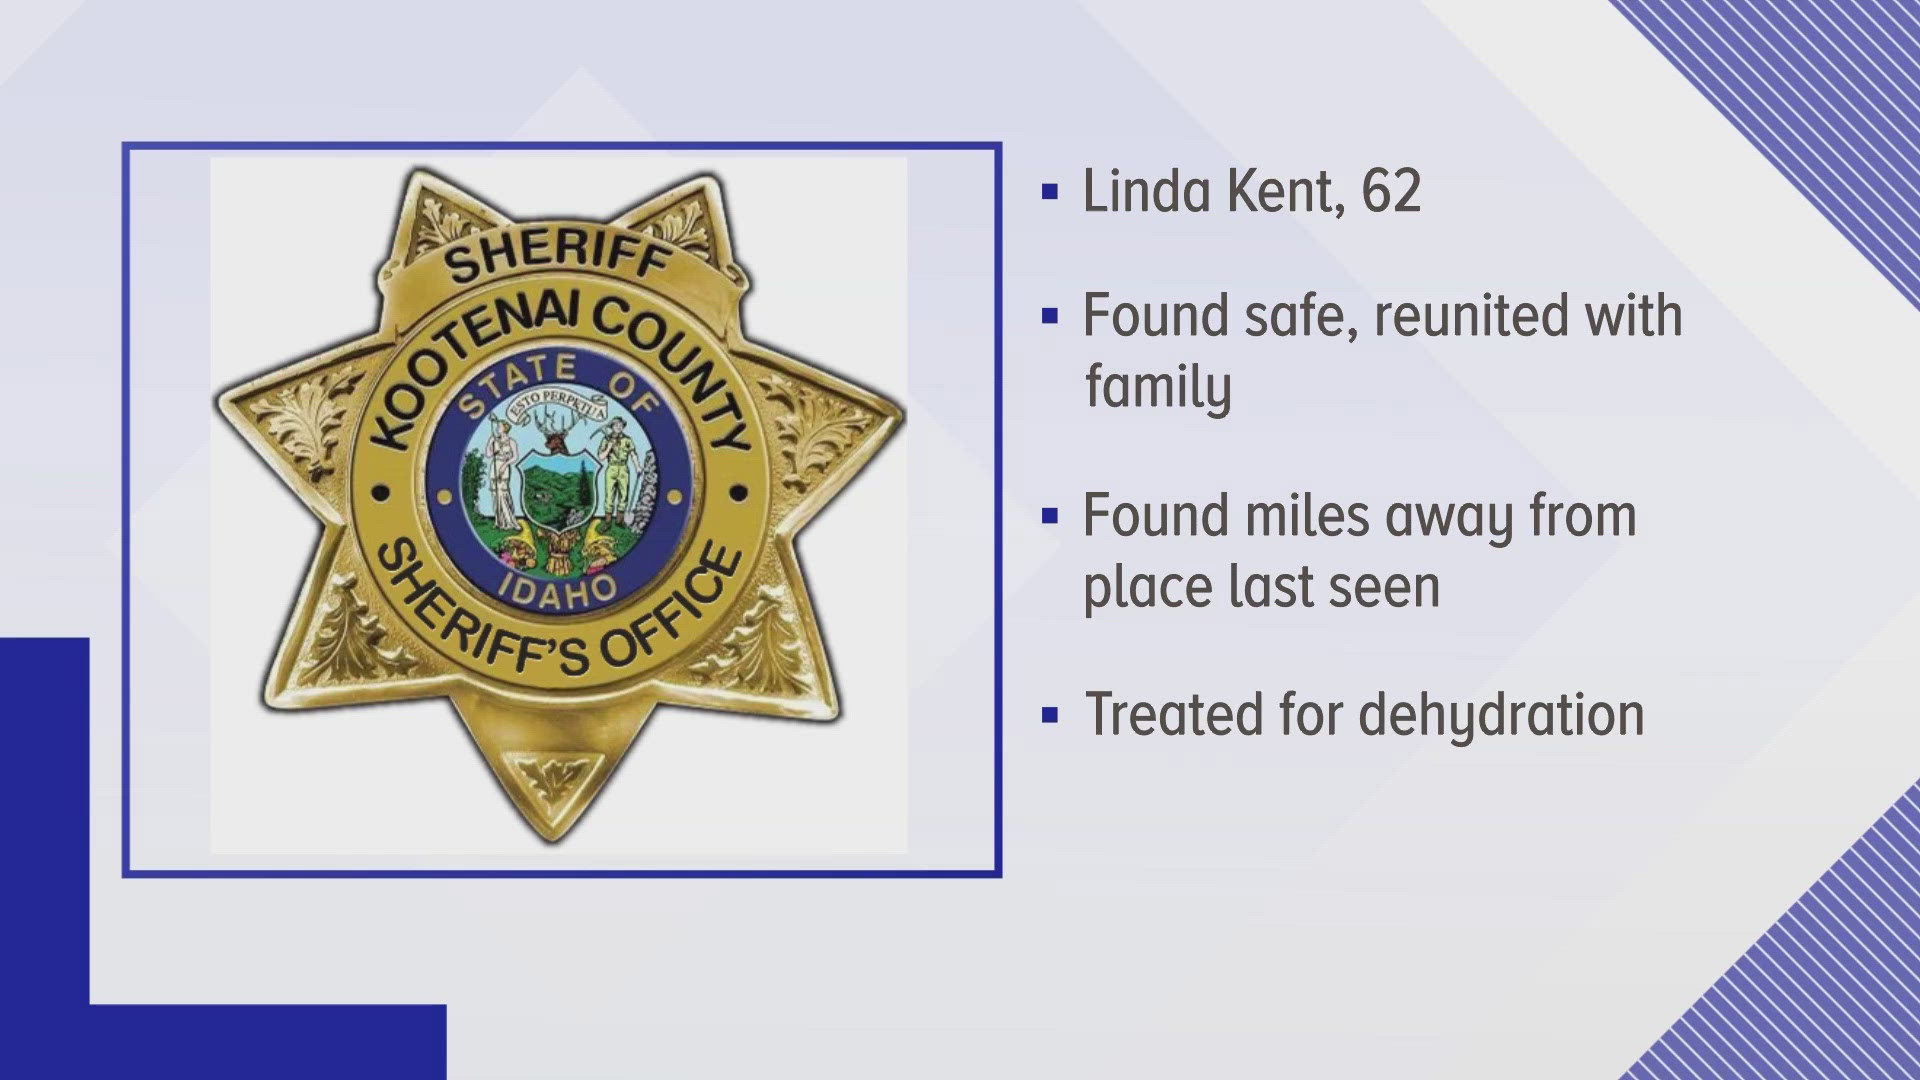 The Kootenai County Sheriff's Office says someone found Linda Kent on his ranch Thursday evening